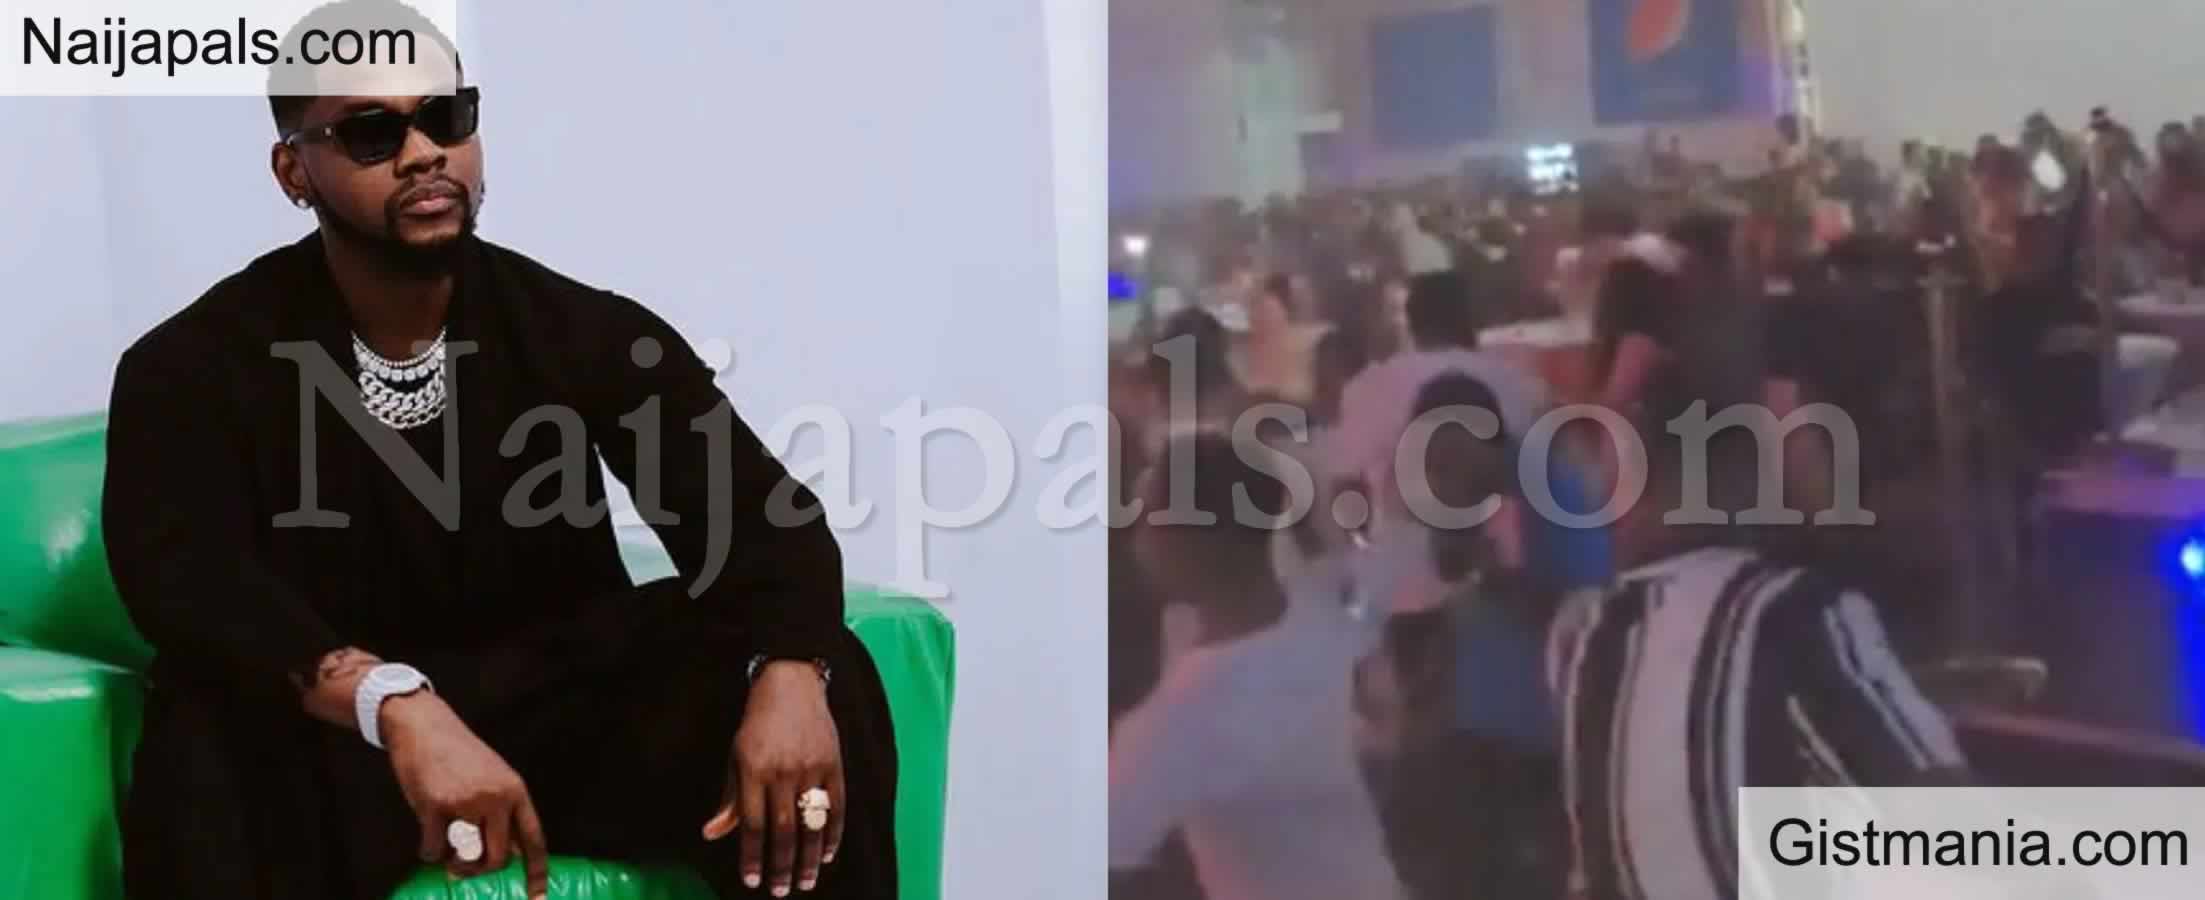 <img alt='.' class='lazyload' data-src='https://img.gistmania.com/emot/video.gif' /> <b>Watch How Irate Fans Tear Hall Apart In Tanzania After Kizz Daniel Failed To Show Up</b>